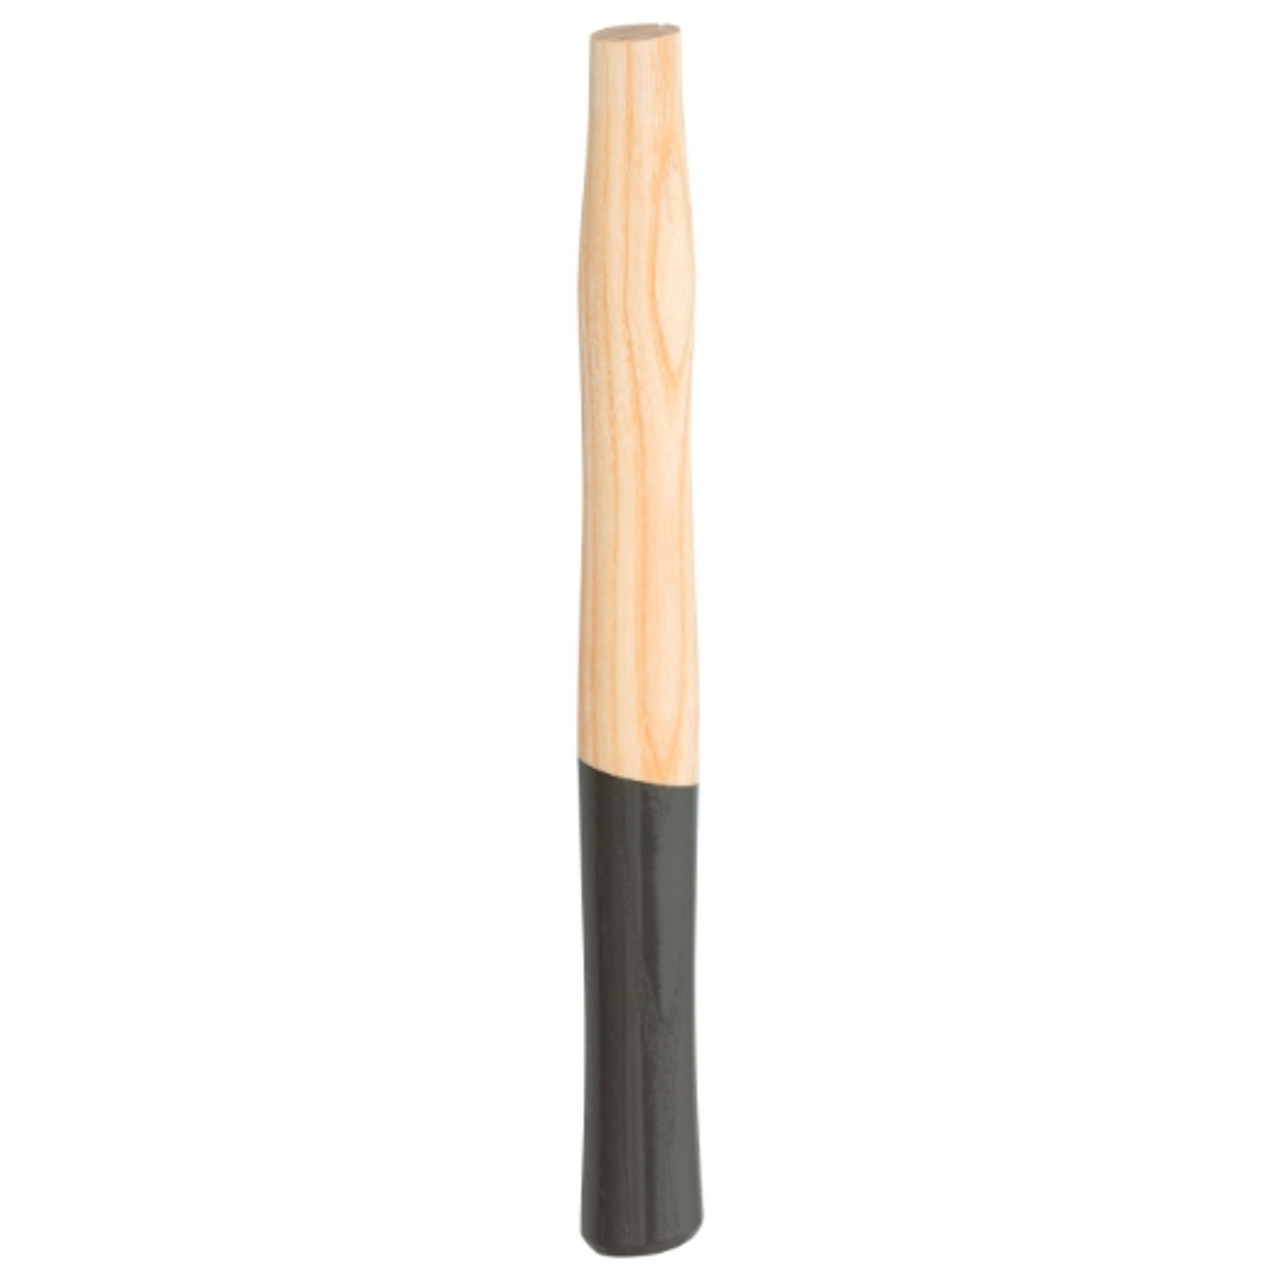 PICARD Spare handles, No. 99012 HS, 300 mm, for 300 gr. hammers